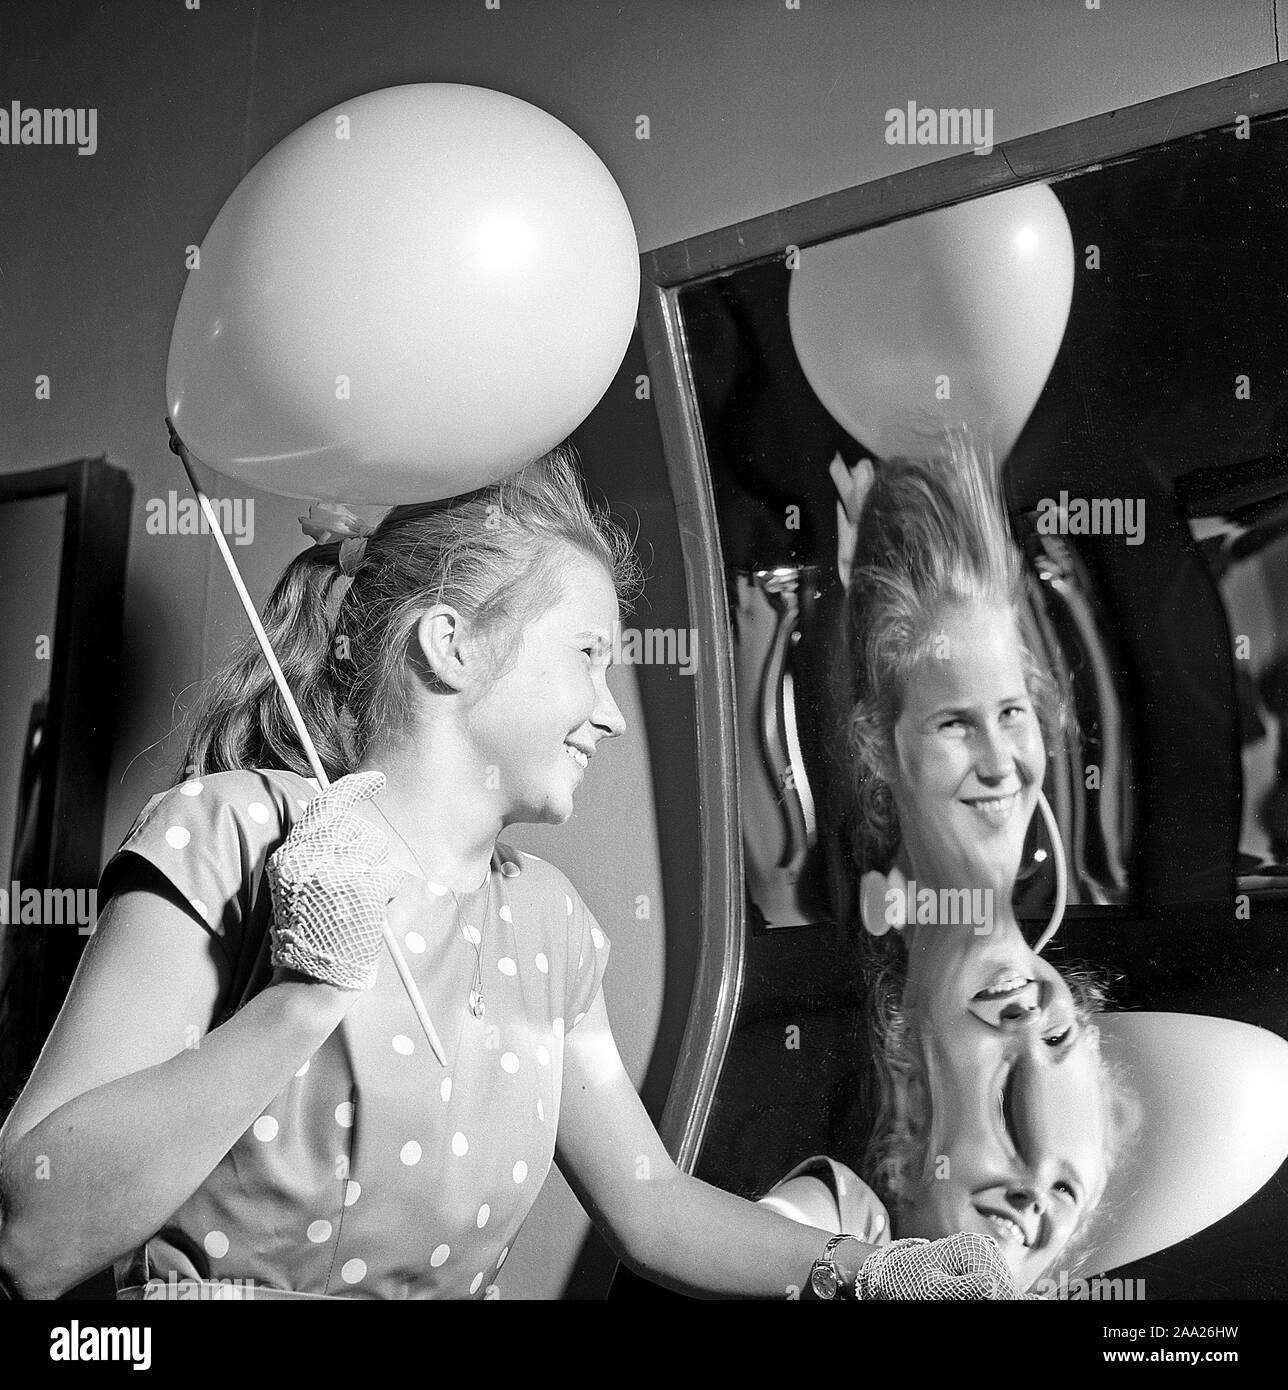 Amusement park in the 1950s. A teenage girl is laughing at how she look in  a funny mirror. Mirrors with different shapes makes the reflection of  people look tall and thin, or